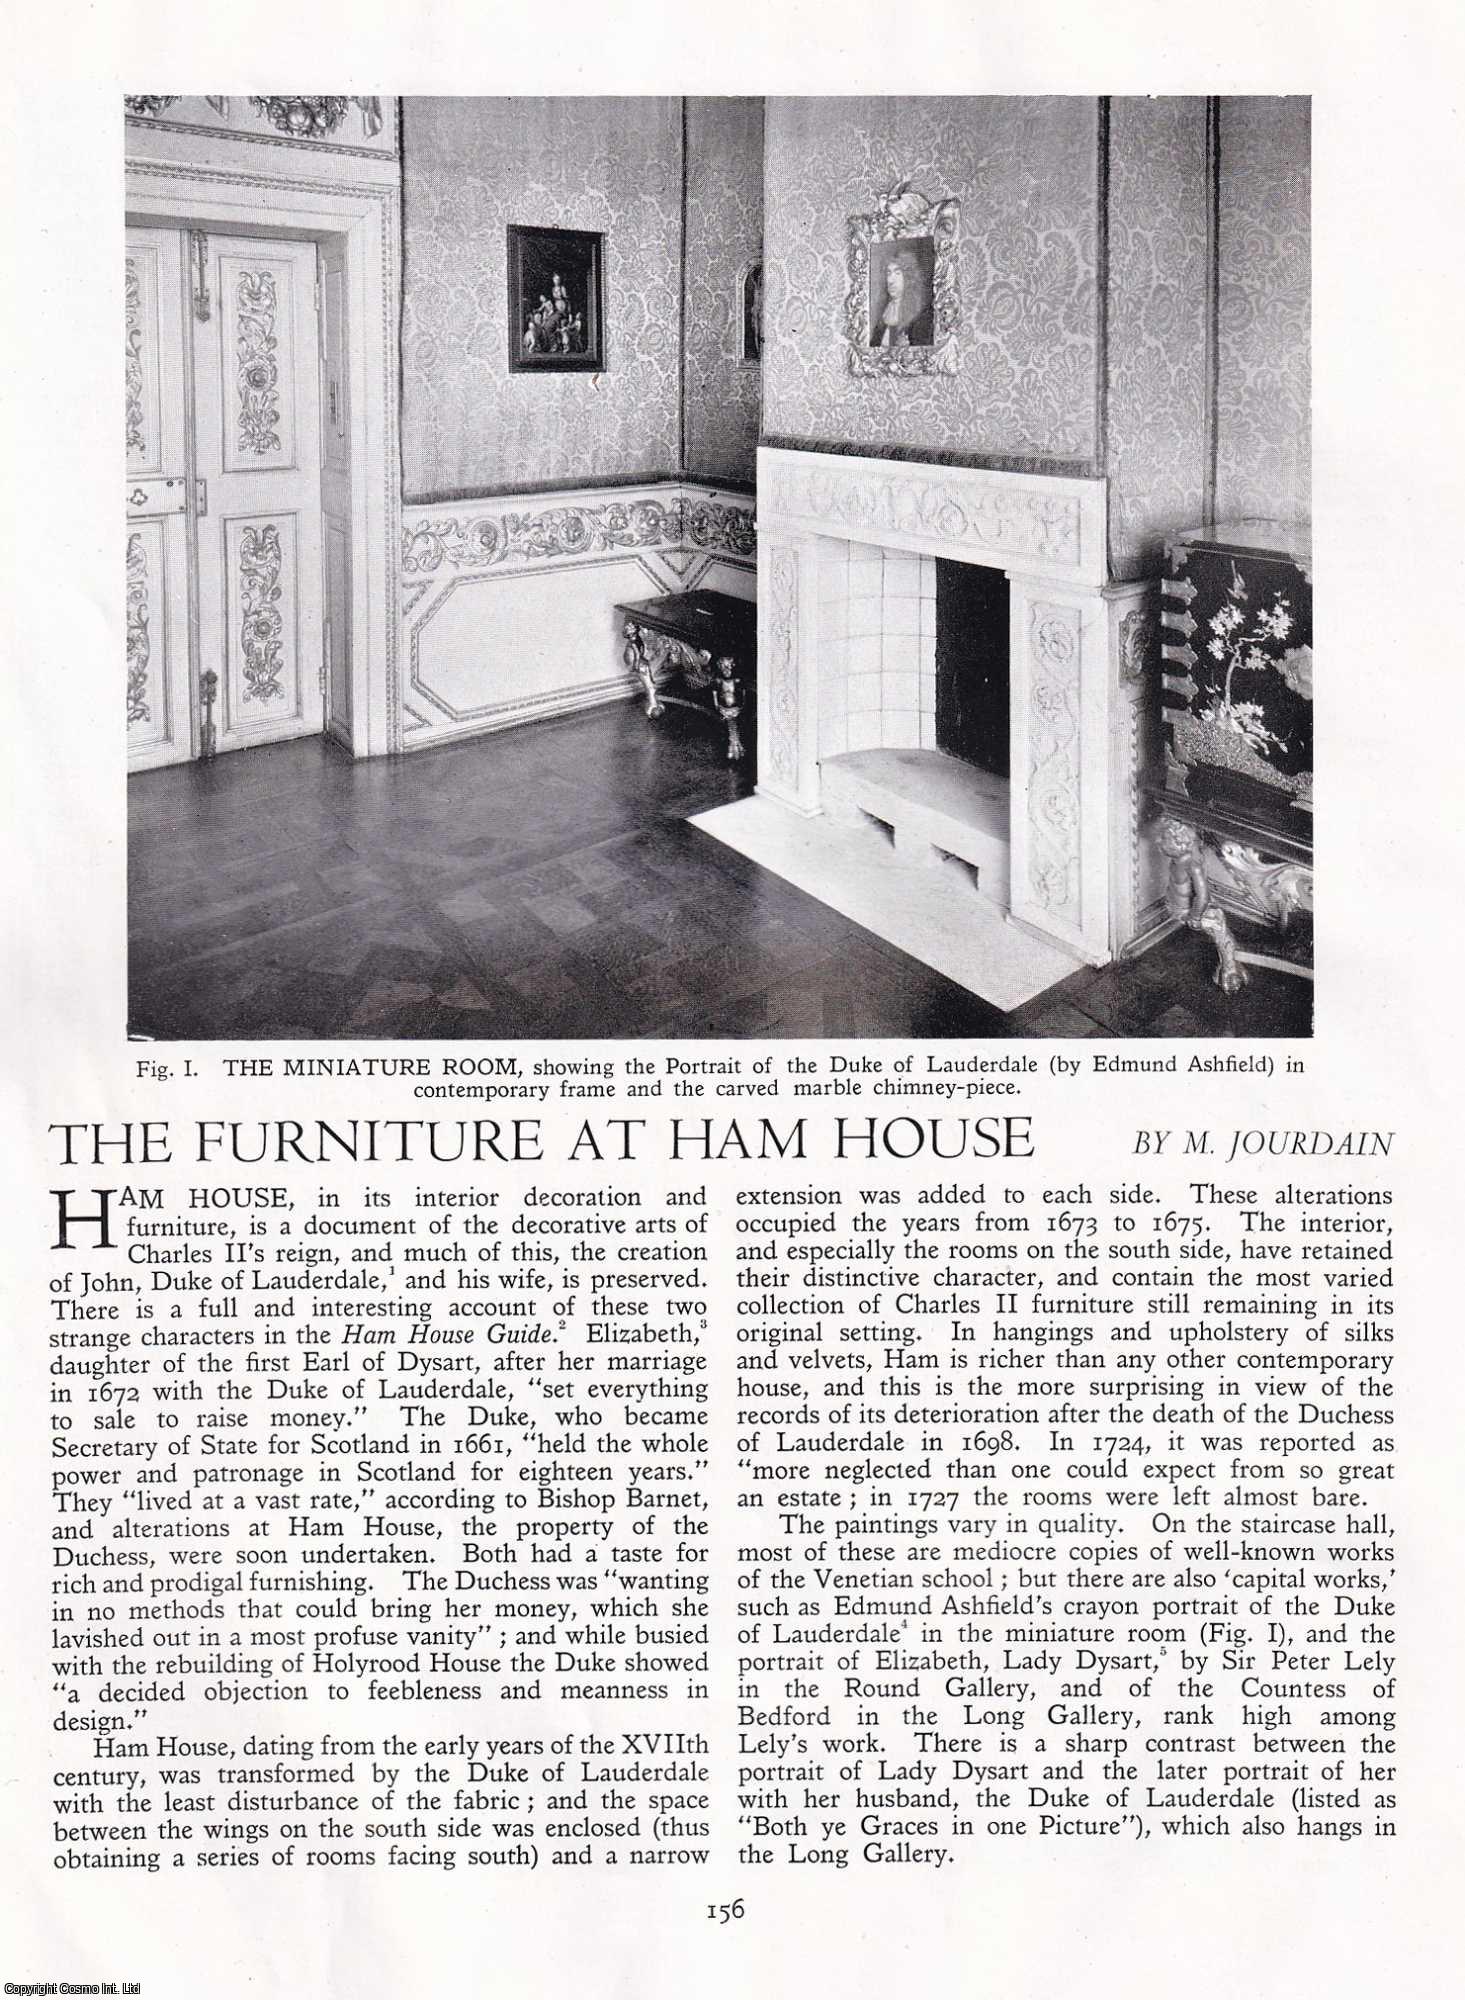 M. Jourdain - The Furniture at Ham House. An uncommon original article from Apollo, the Magazine of the Arts, 1950.